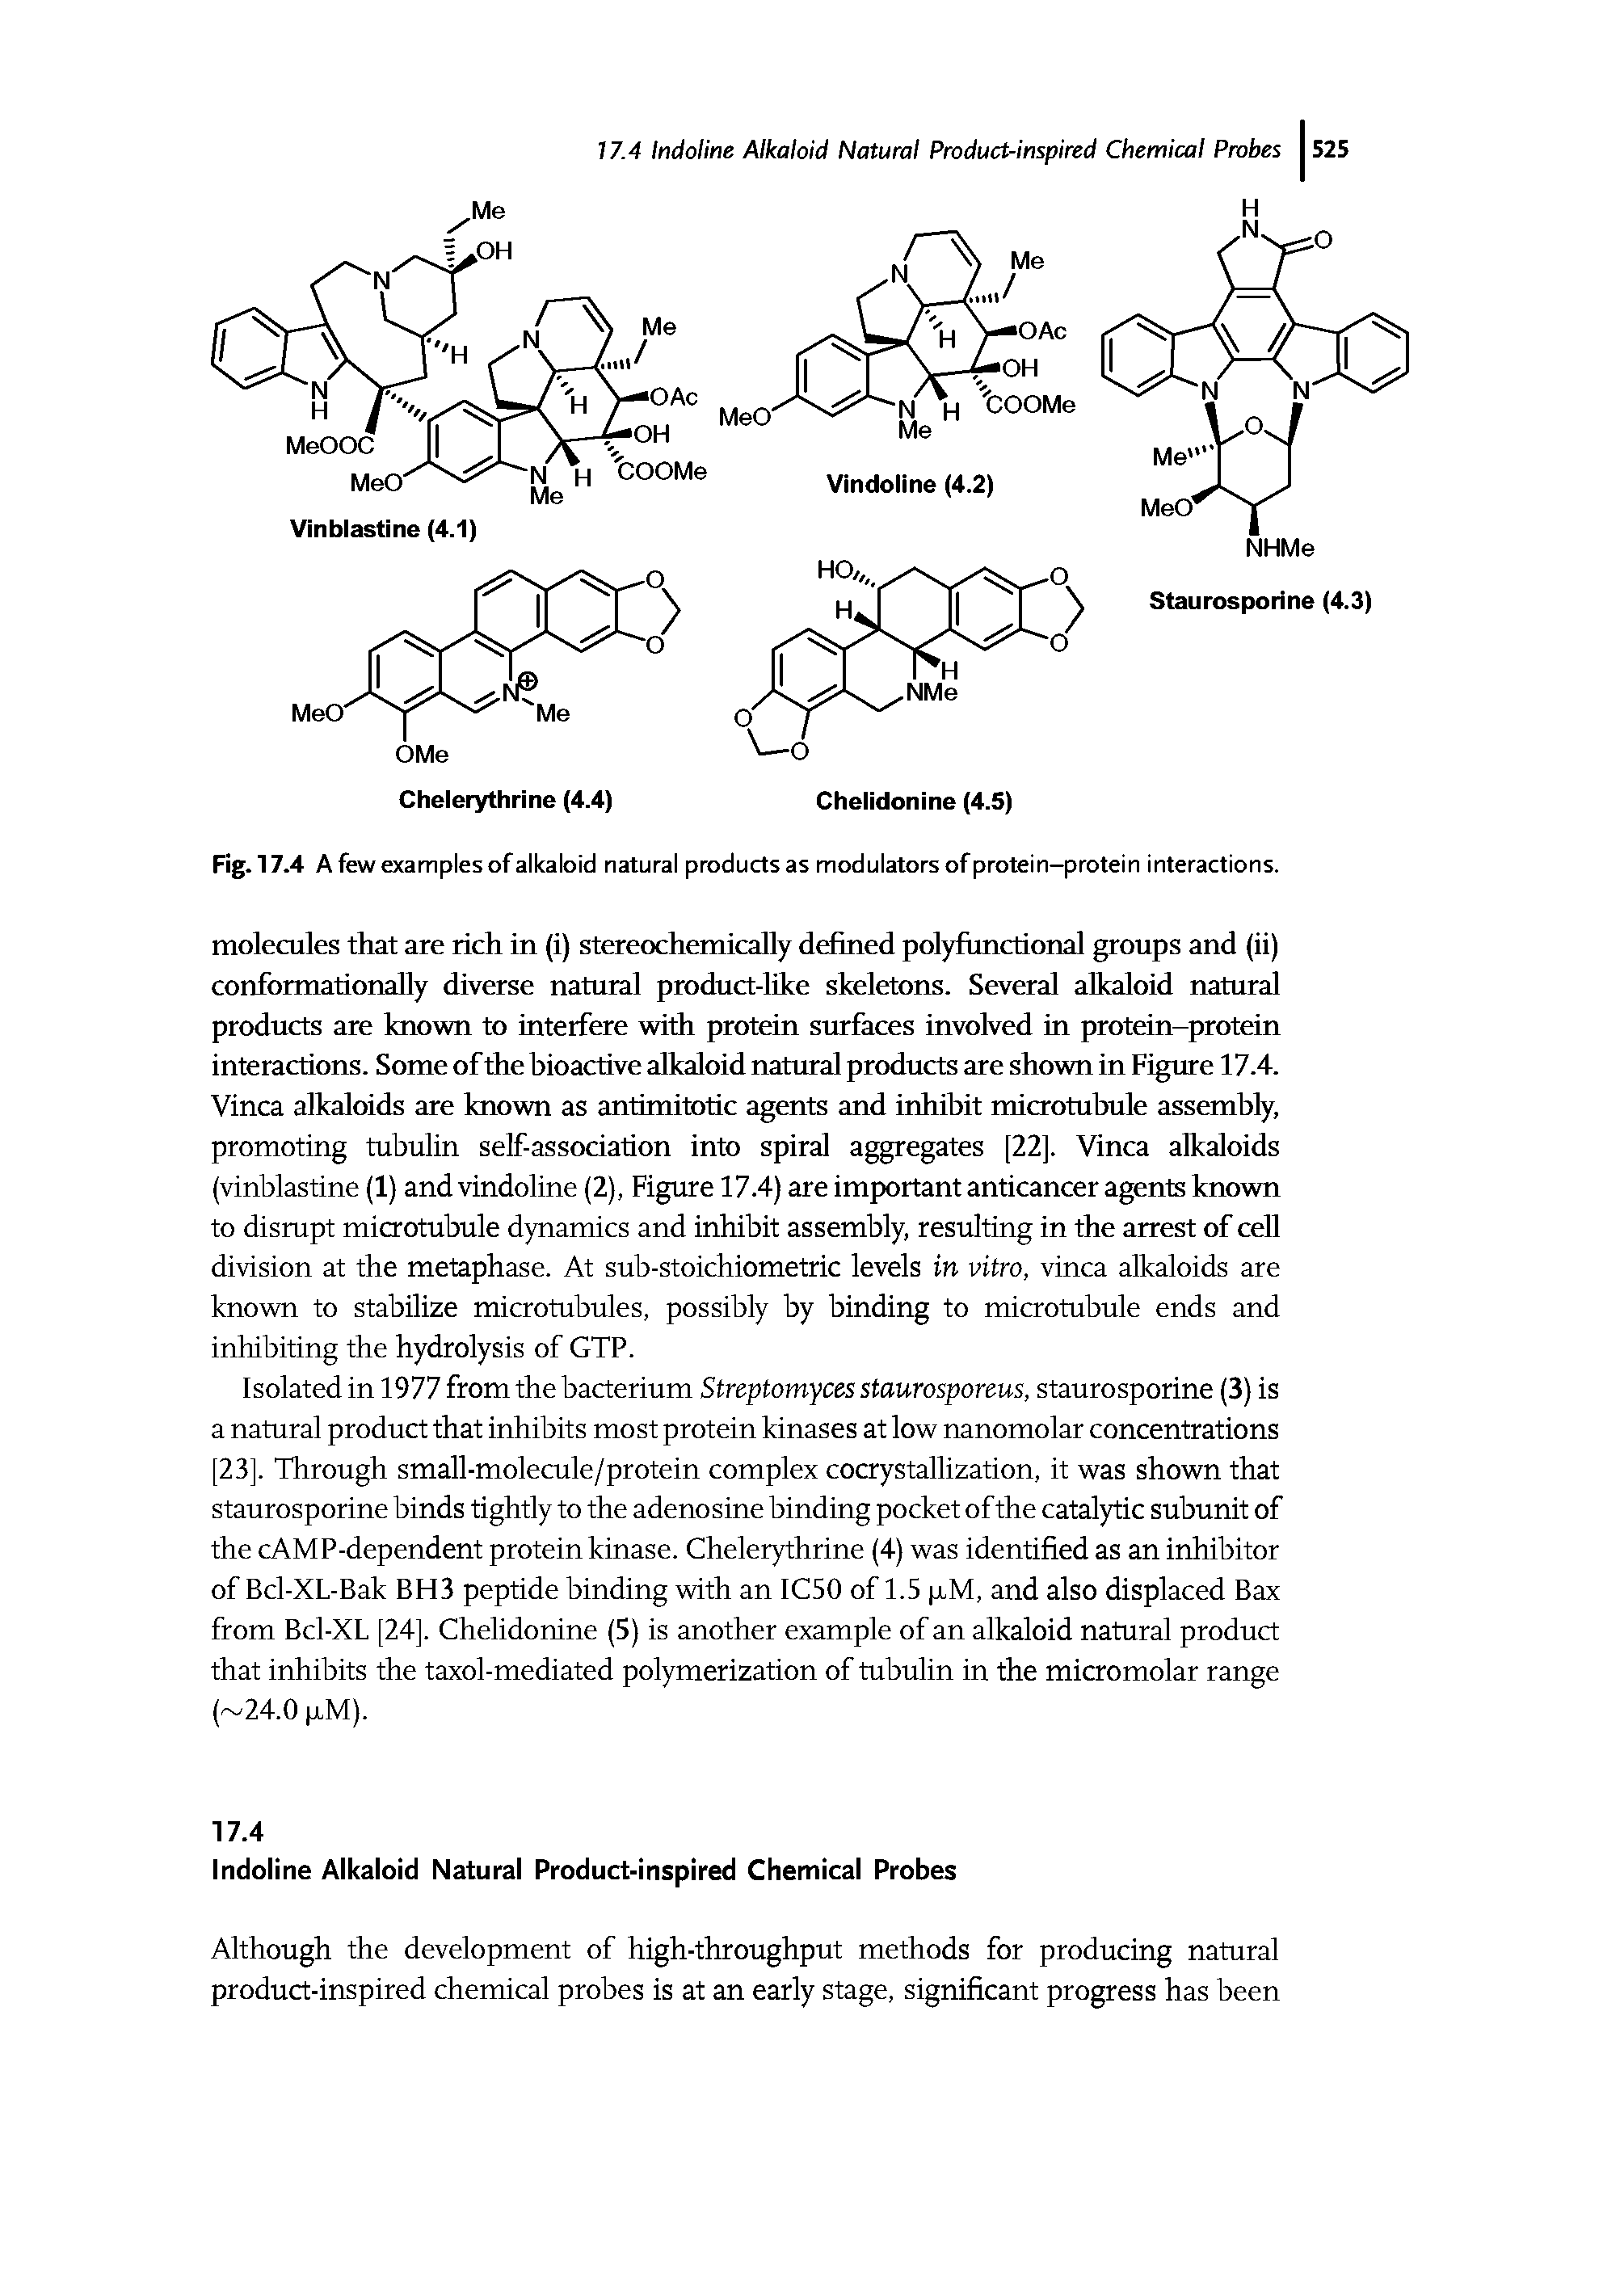 Fig. 17.4 A few examples of alkaloid natural products as modulators of protein-protein interactions.